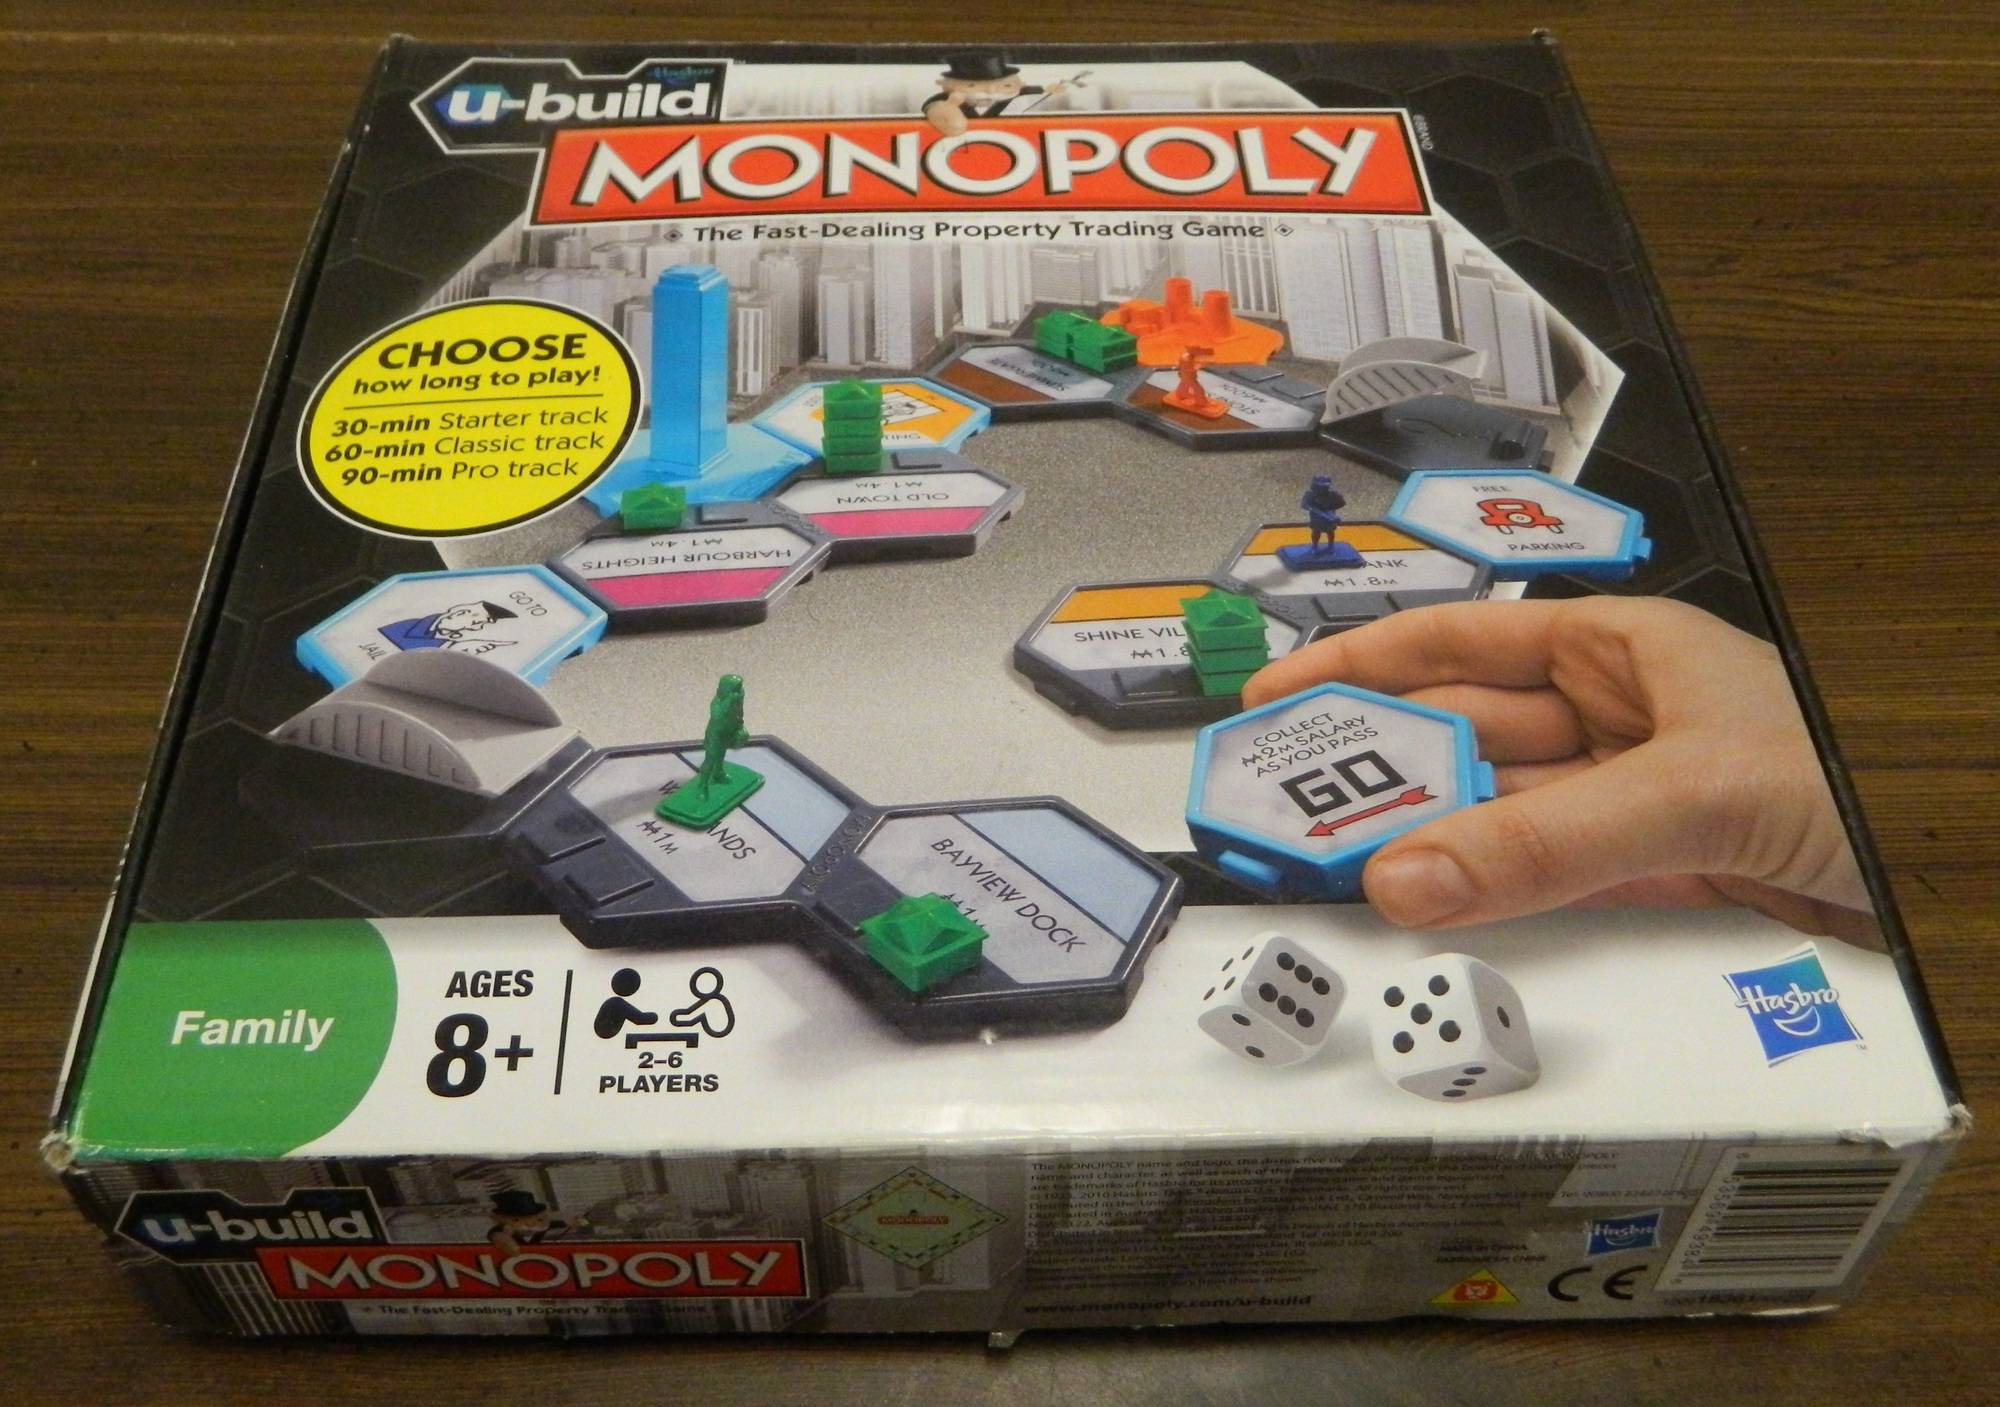 U-Build Monopoly Board Game Review and Rules